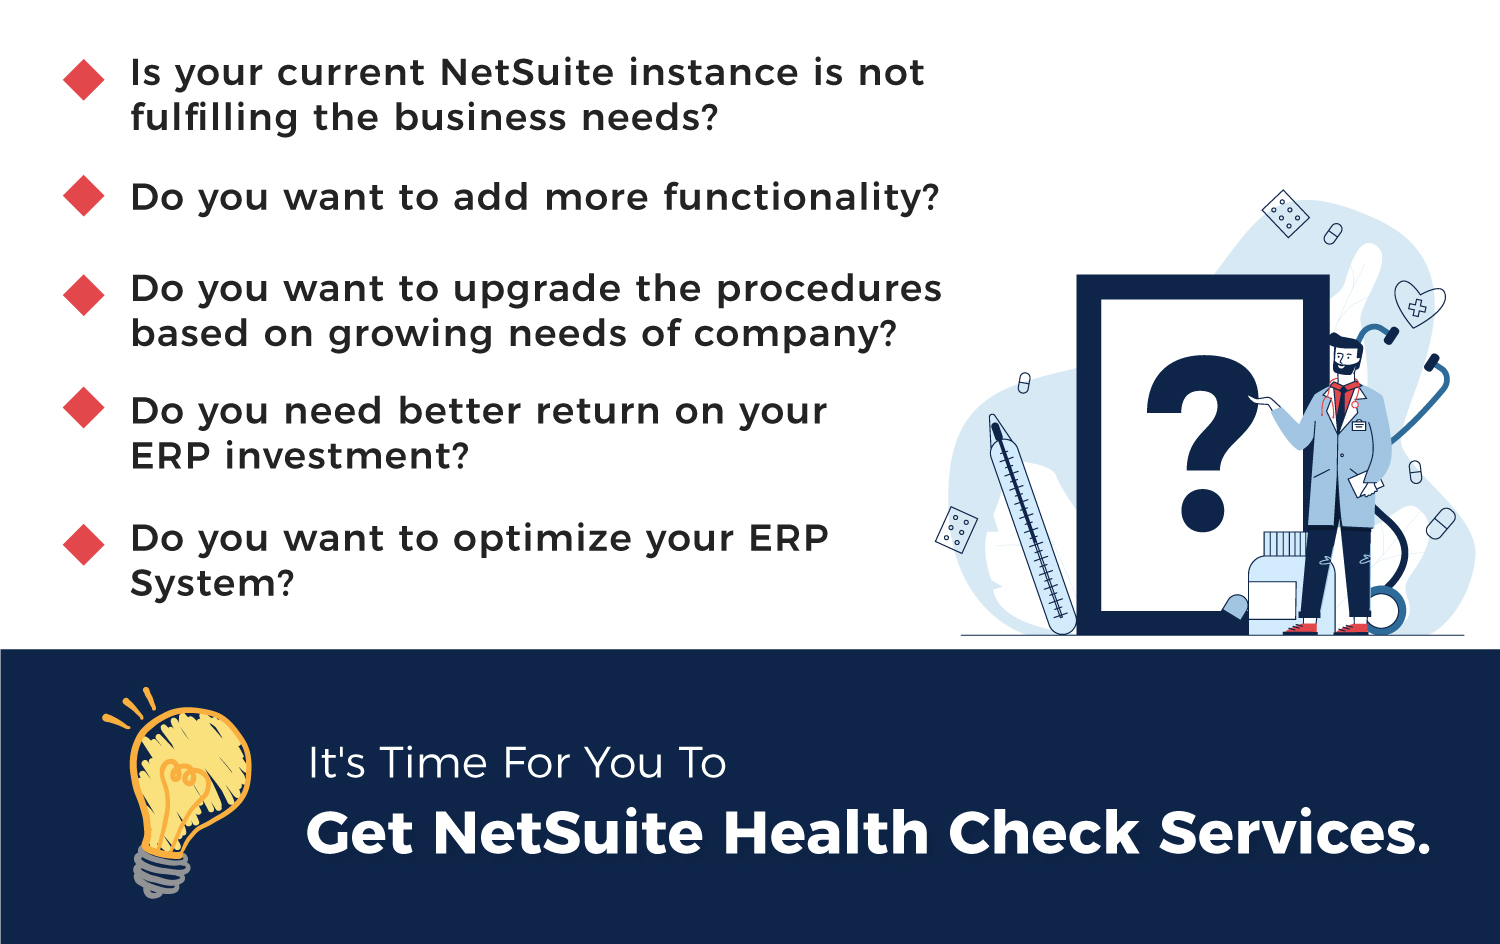 Time to get NetSuite Health Services